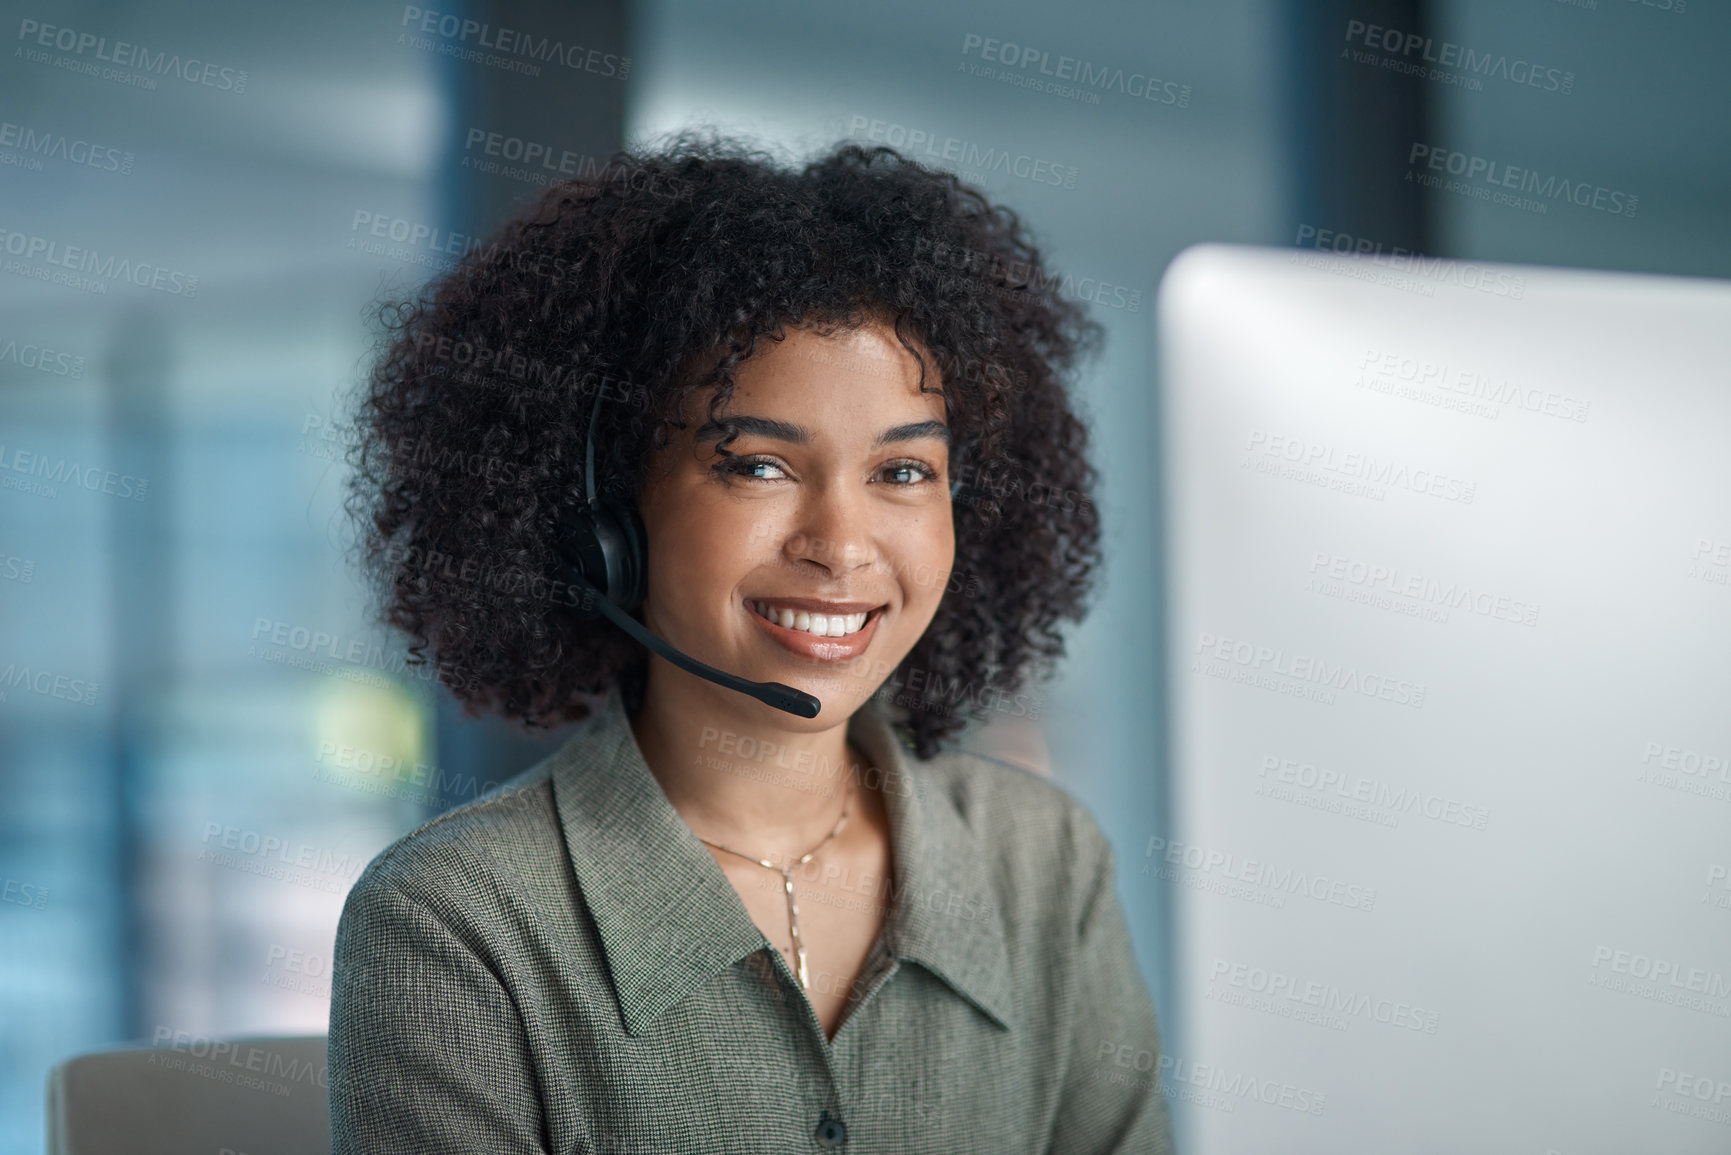 Buy stock photo Shot of a young smiling female agent working in a call centre